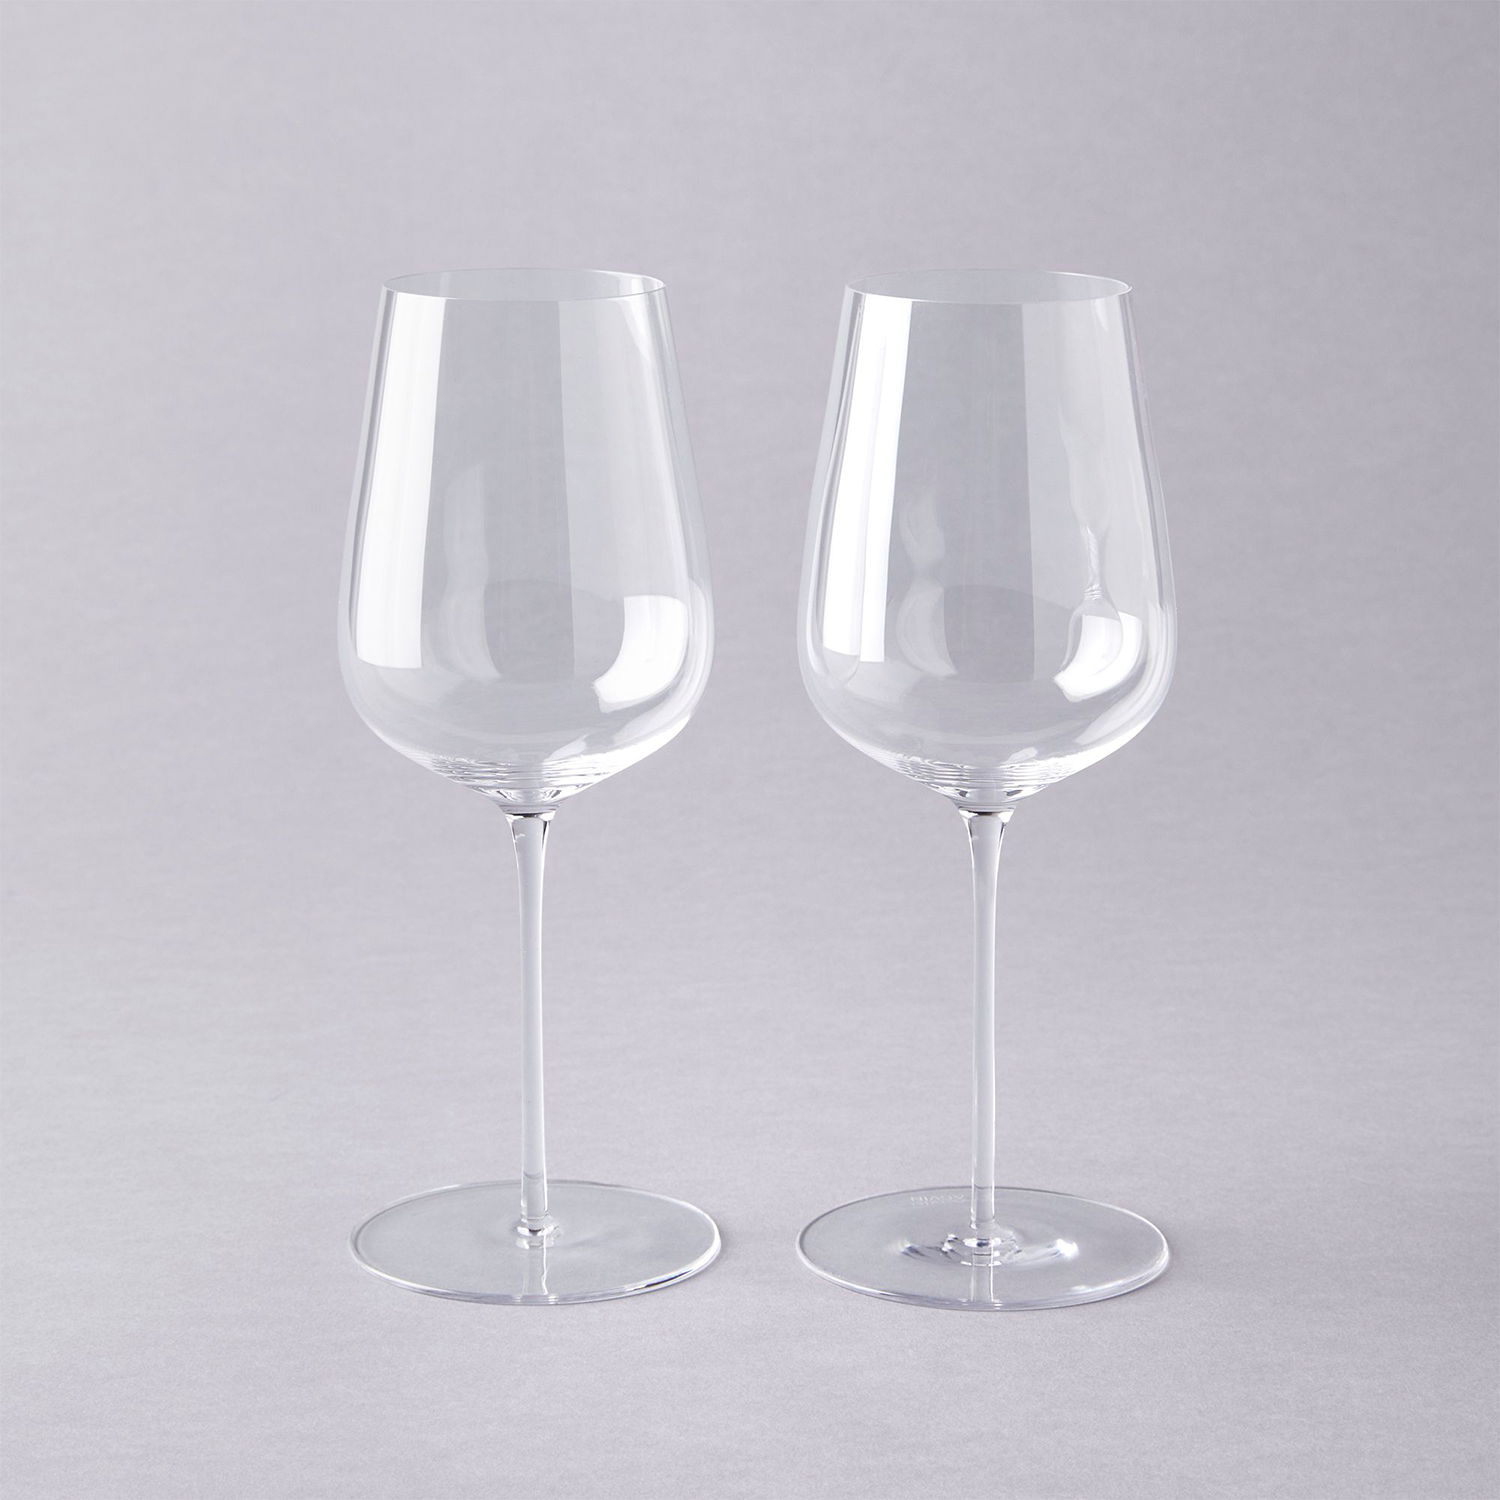 pair of wine glasses by Glasvin